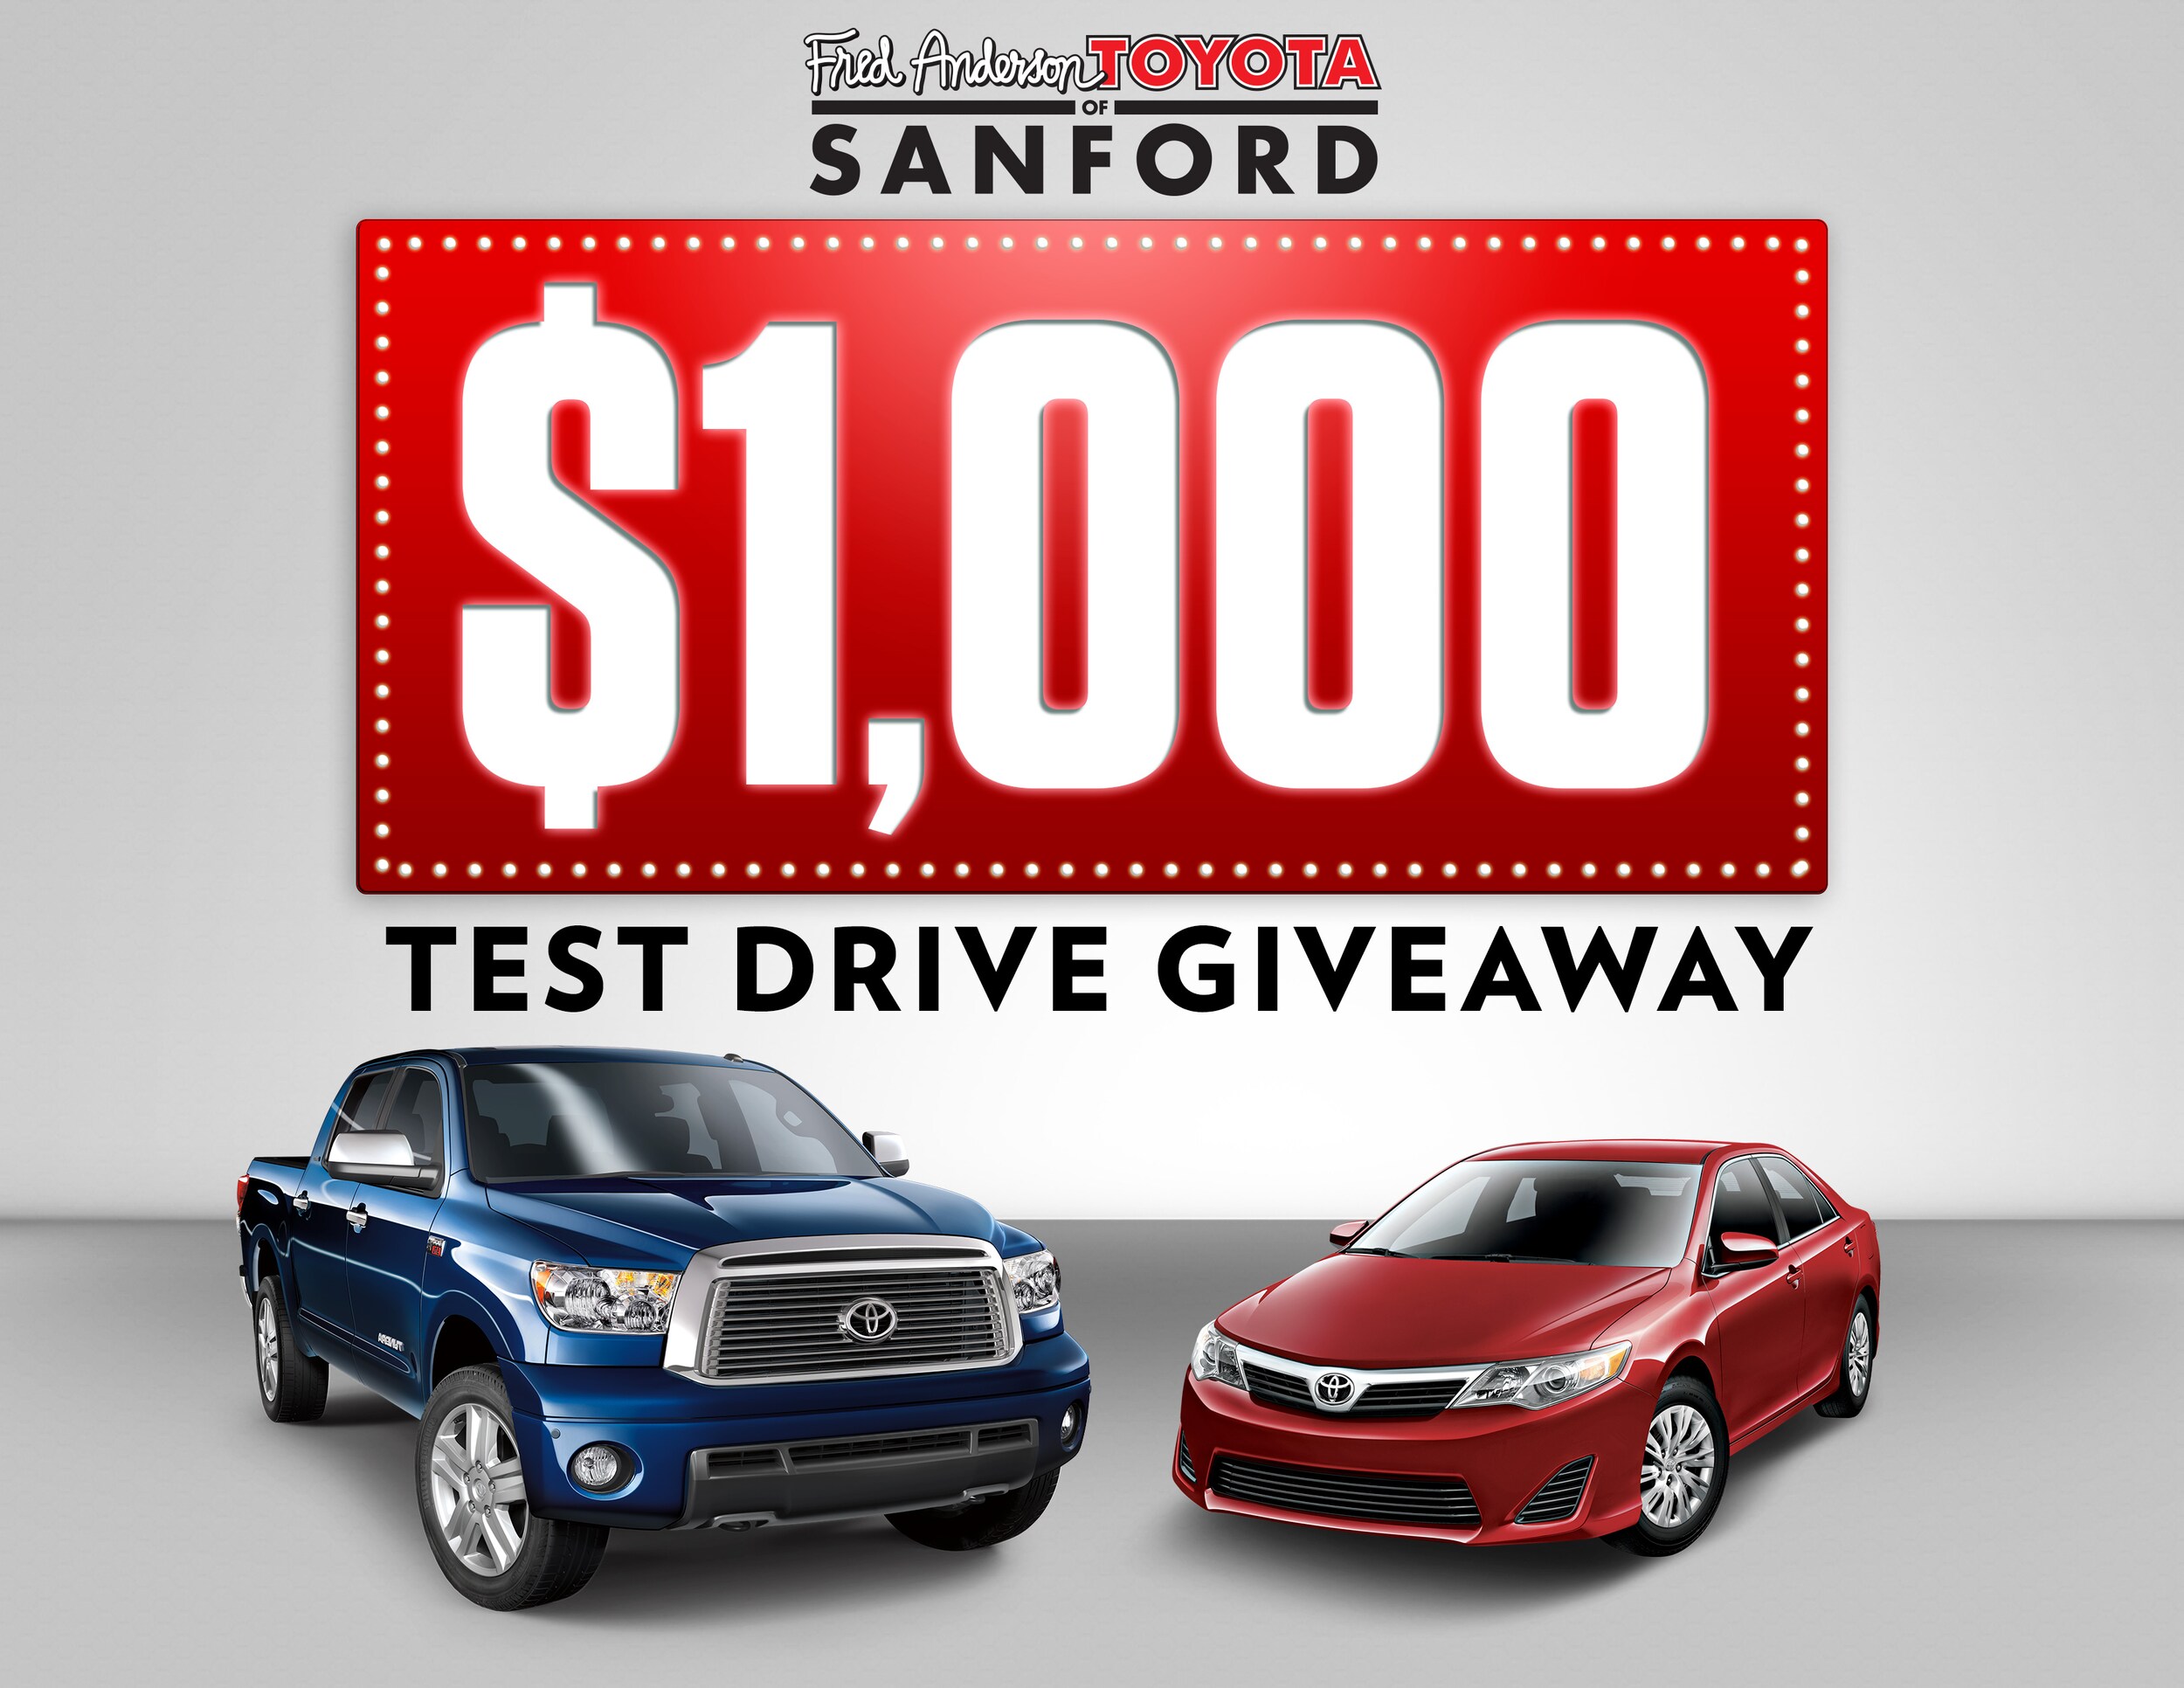 fred anderson toyota sanford nc #2